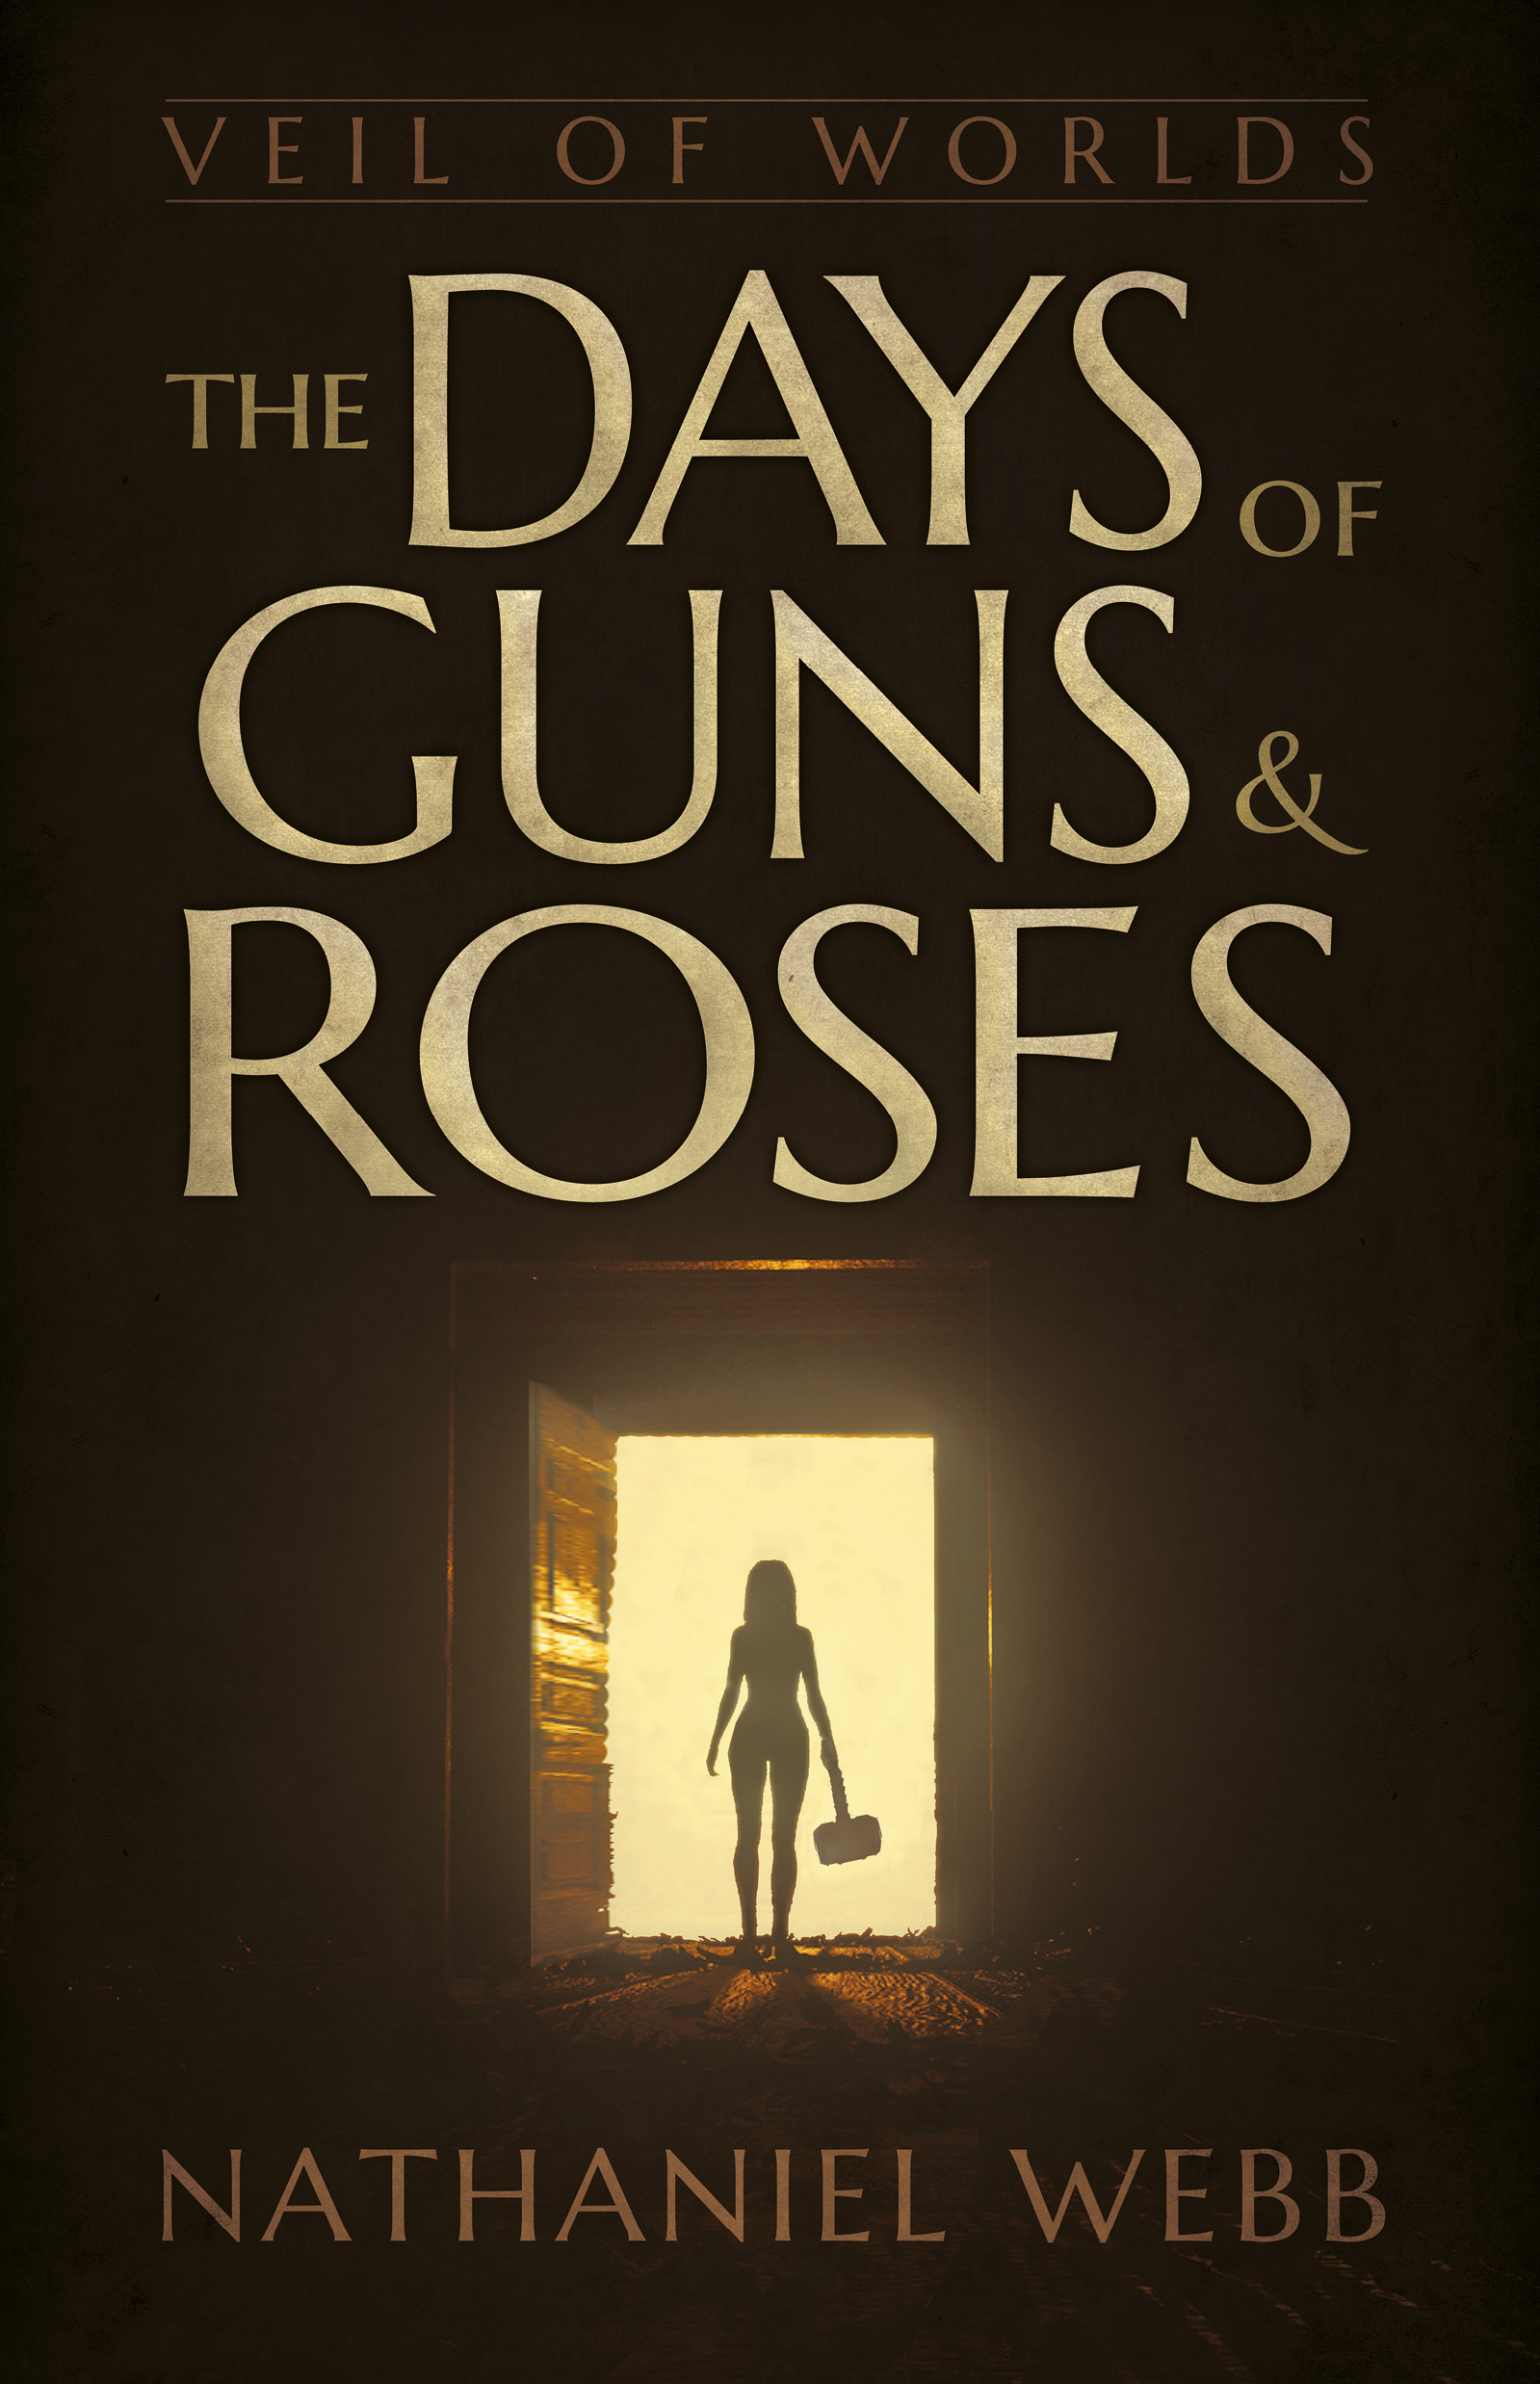 The Days of Guns and Roses Ebook.jpg